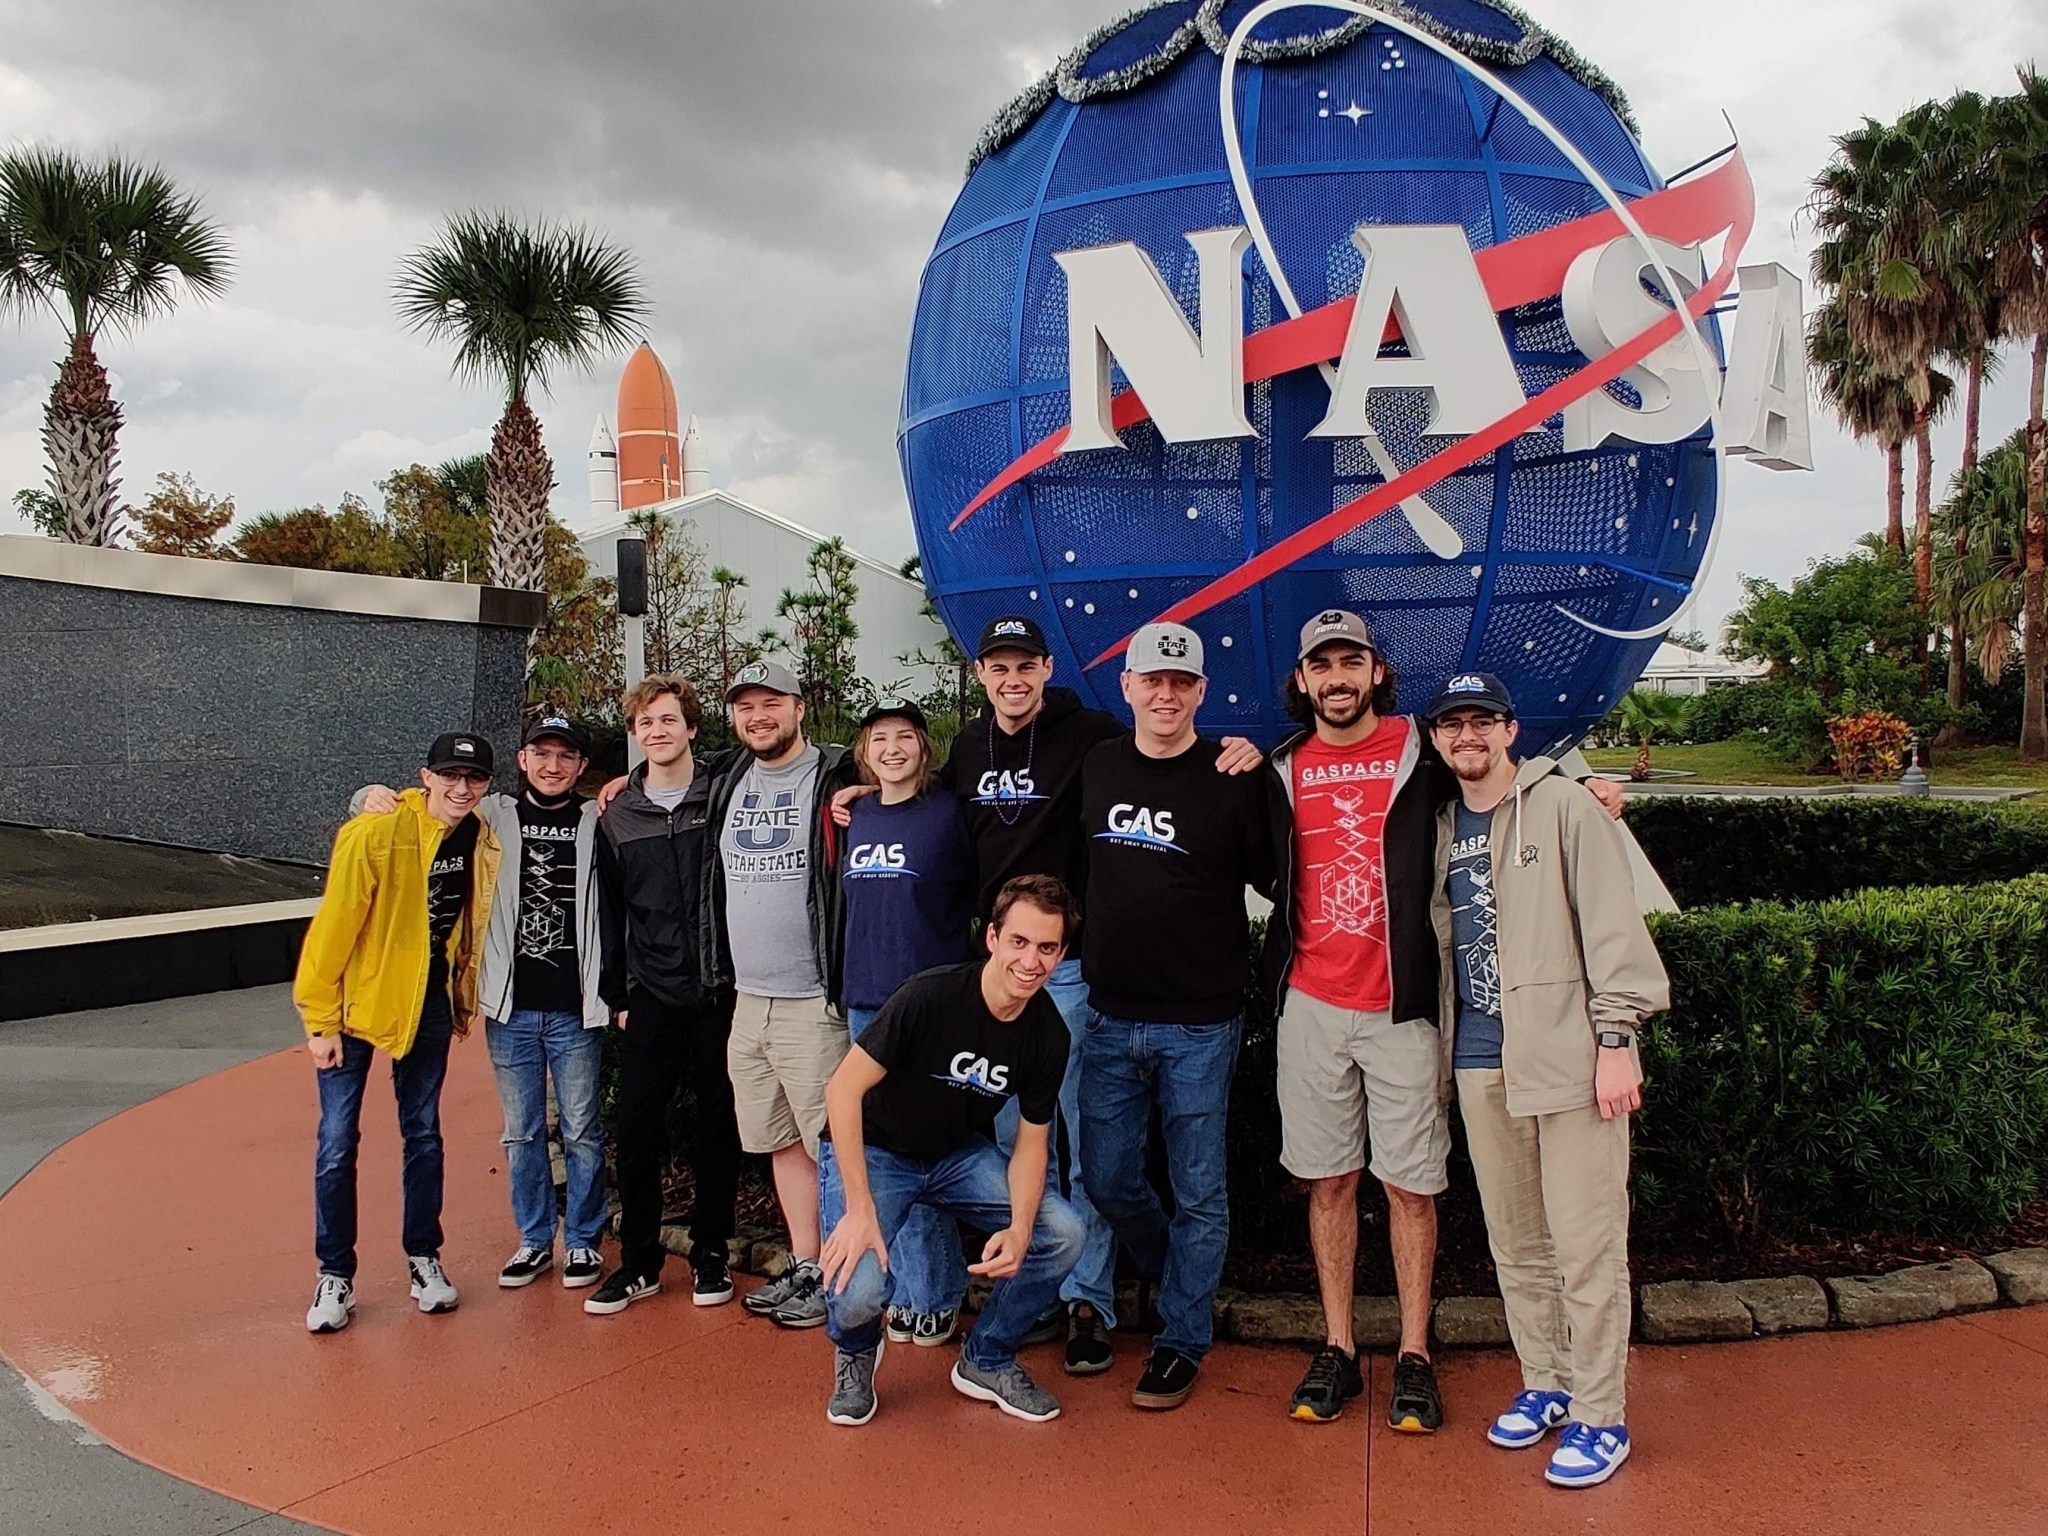 A group of students stand in front of a NASA sign with various bushes and plants around, in the very background is the top of the solid booster rocket on the launch pad.